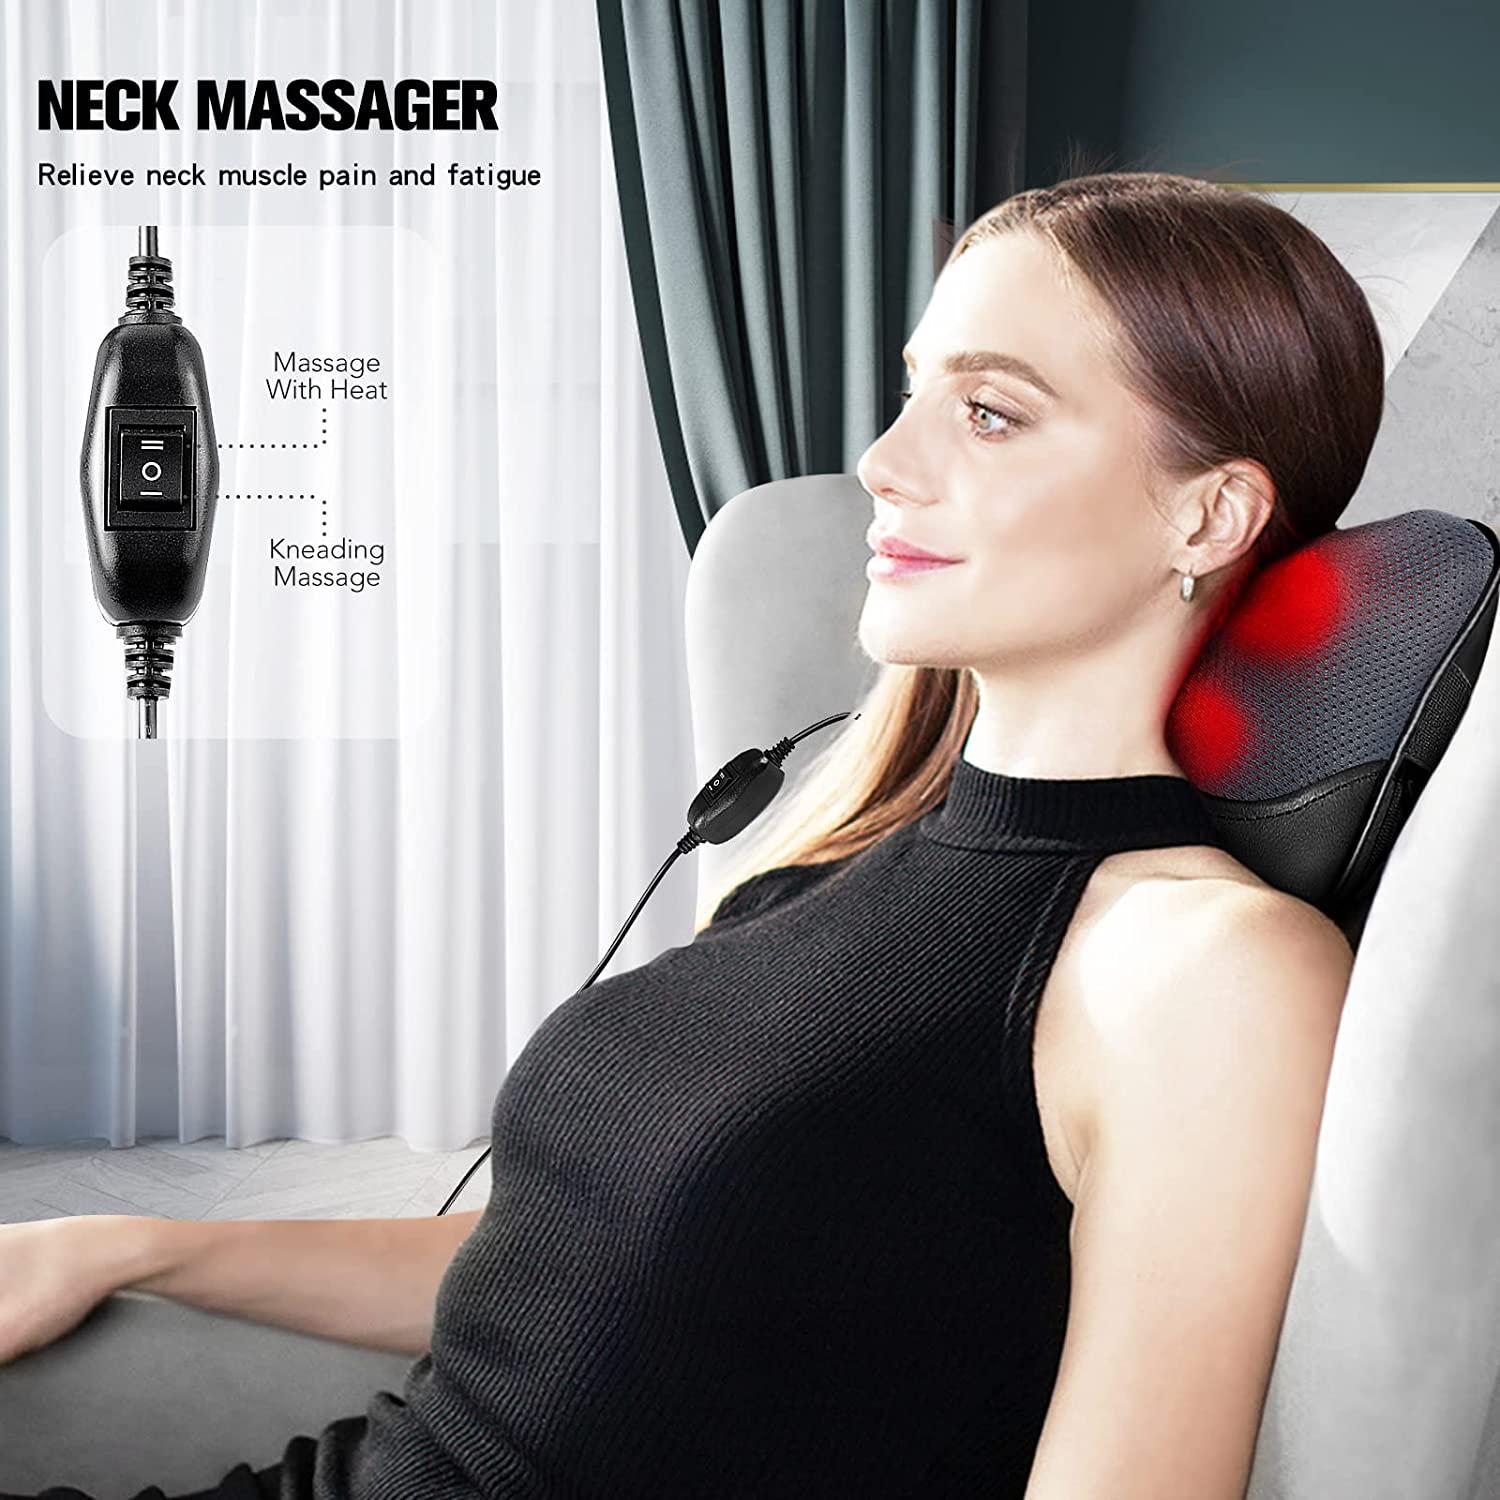 Shiatsu Neck and Back Massager - 8 Heated Rollers Kneading Massage Pillow  for Shoulders, Lower Back, Calf, Legs, Foot - Relaxation Gifts for Men,  Women - Shoulder and Neck Massager Present for